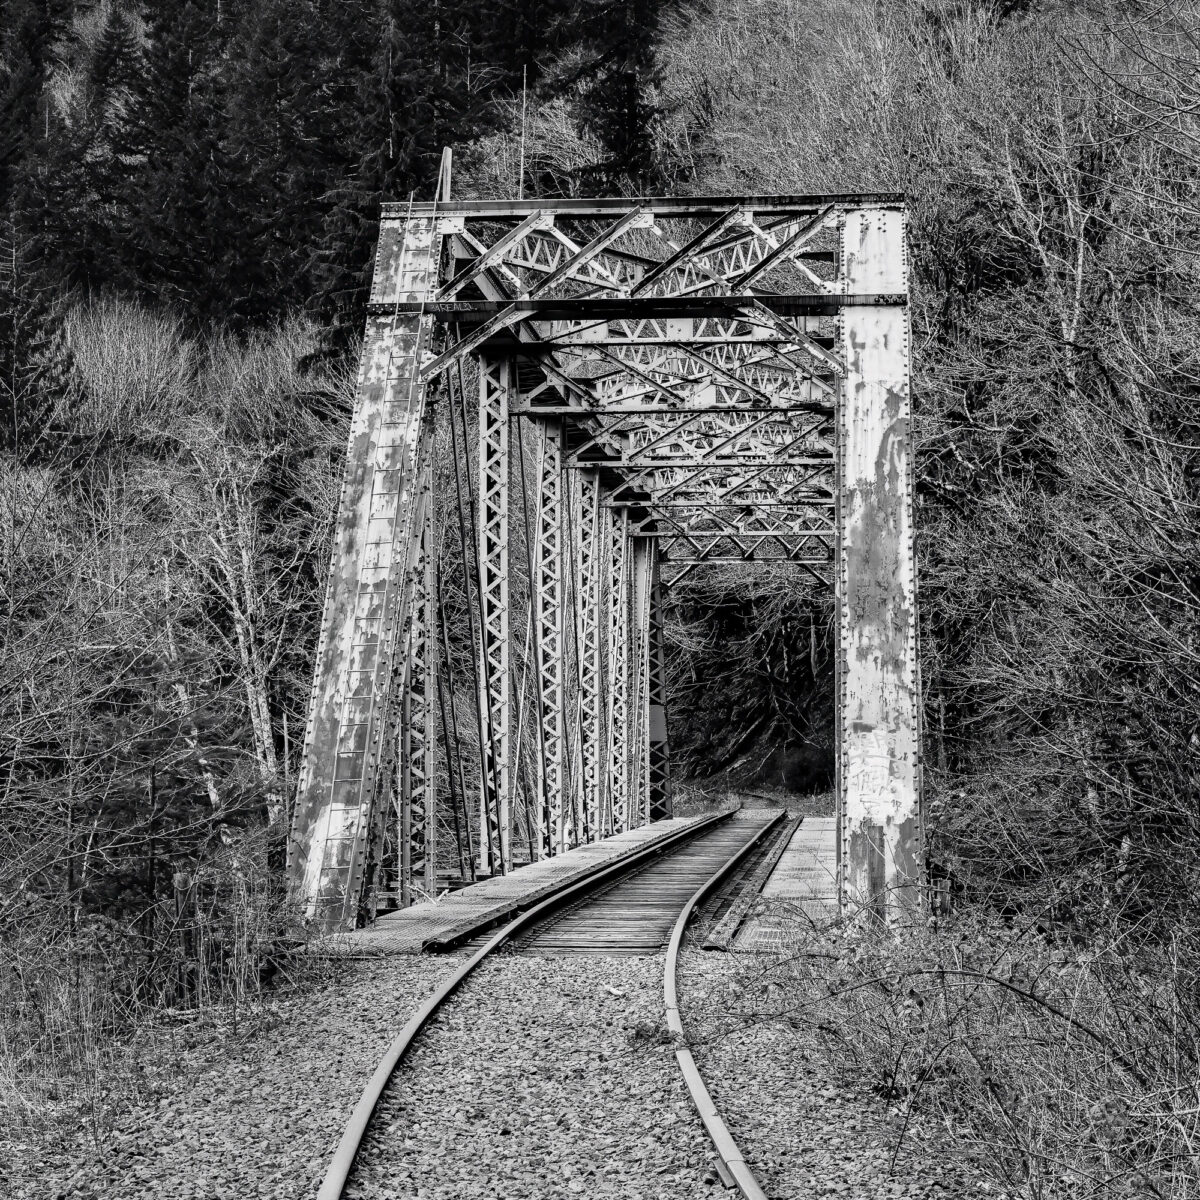 Immerse yourself in the captivating allure of the "Old Steel Railroad Bridge" as it spans the Nehalem River in scenic Oregon. This black and white intimate landscape photograph showcases the bridge's timeless beauty, revealing its weathered steel structure against the picturesque backdrop of the spring forest. The monochrome tones evoke a sense of nostalgia, inviting you to explore the rich history and tranquility of this iconic landmark nestled in the heart of northwestern Oregon.